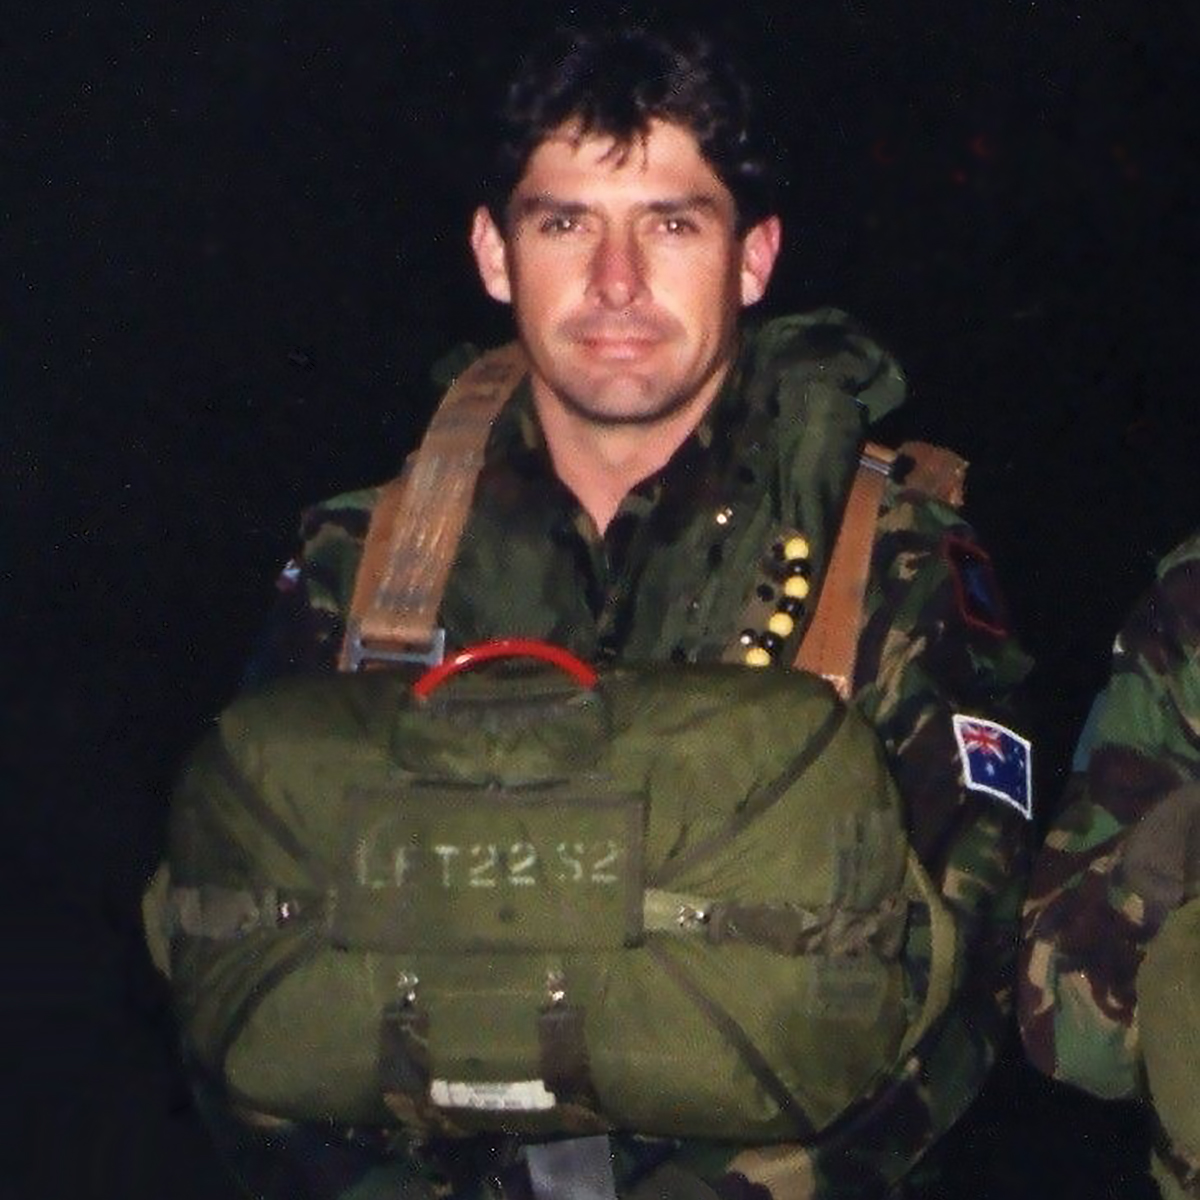 Chris is a former paratrooper who served with the Australian Army